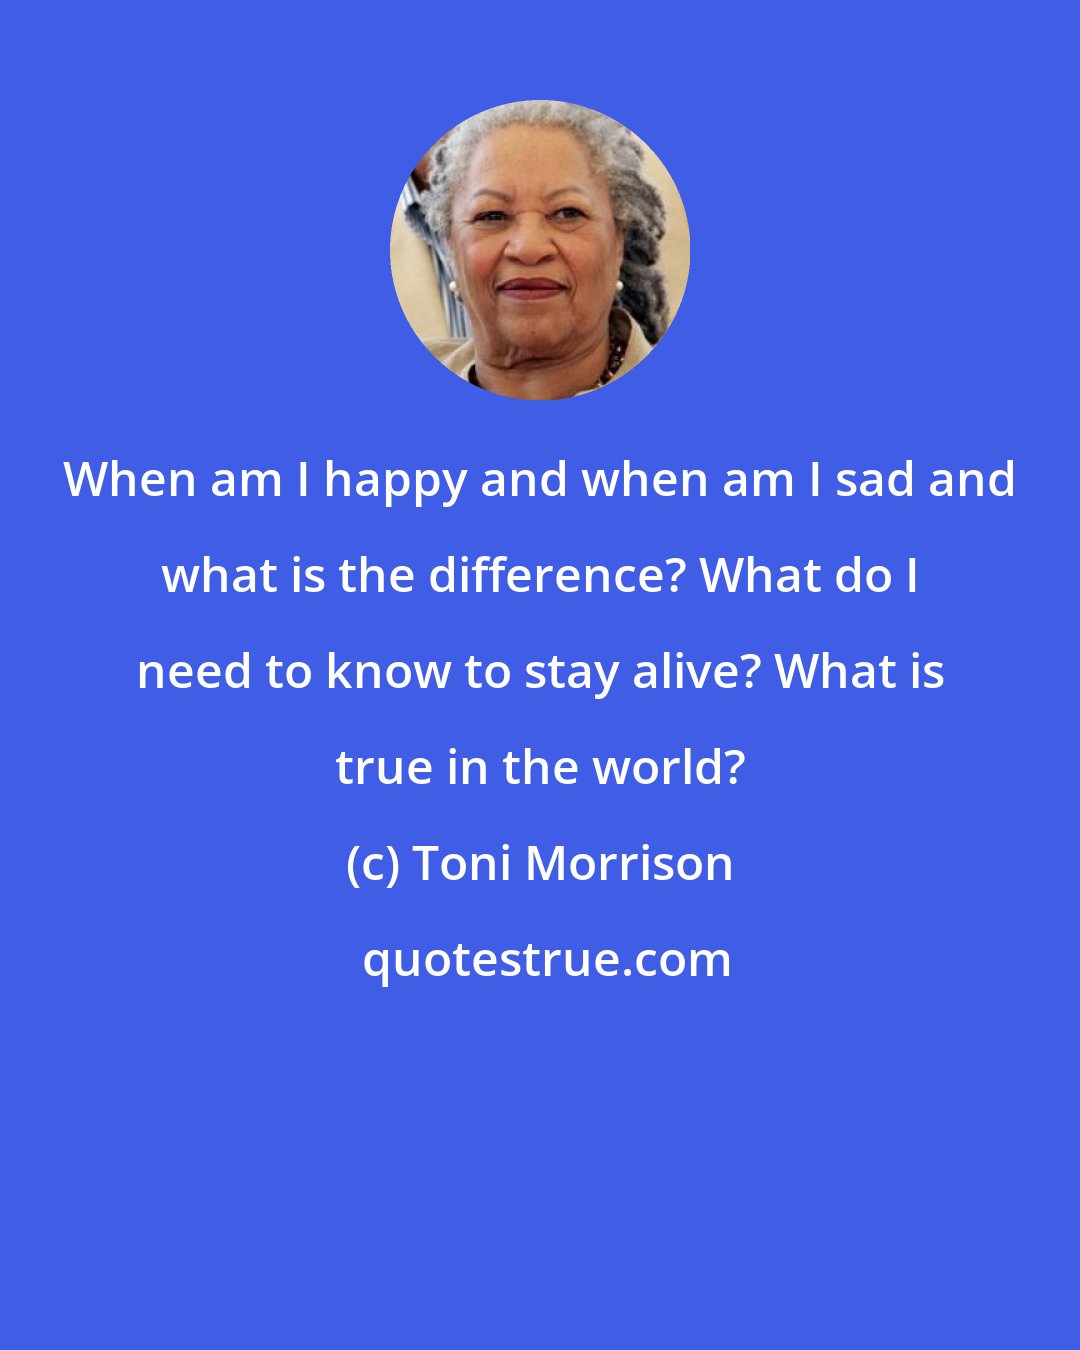 Toni Morrison: When am I happy and when am I sad and what is the difference? What do I need to know to stay alive? What is true in the world?